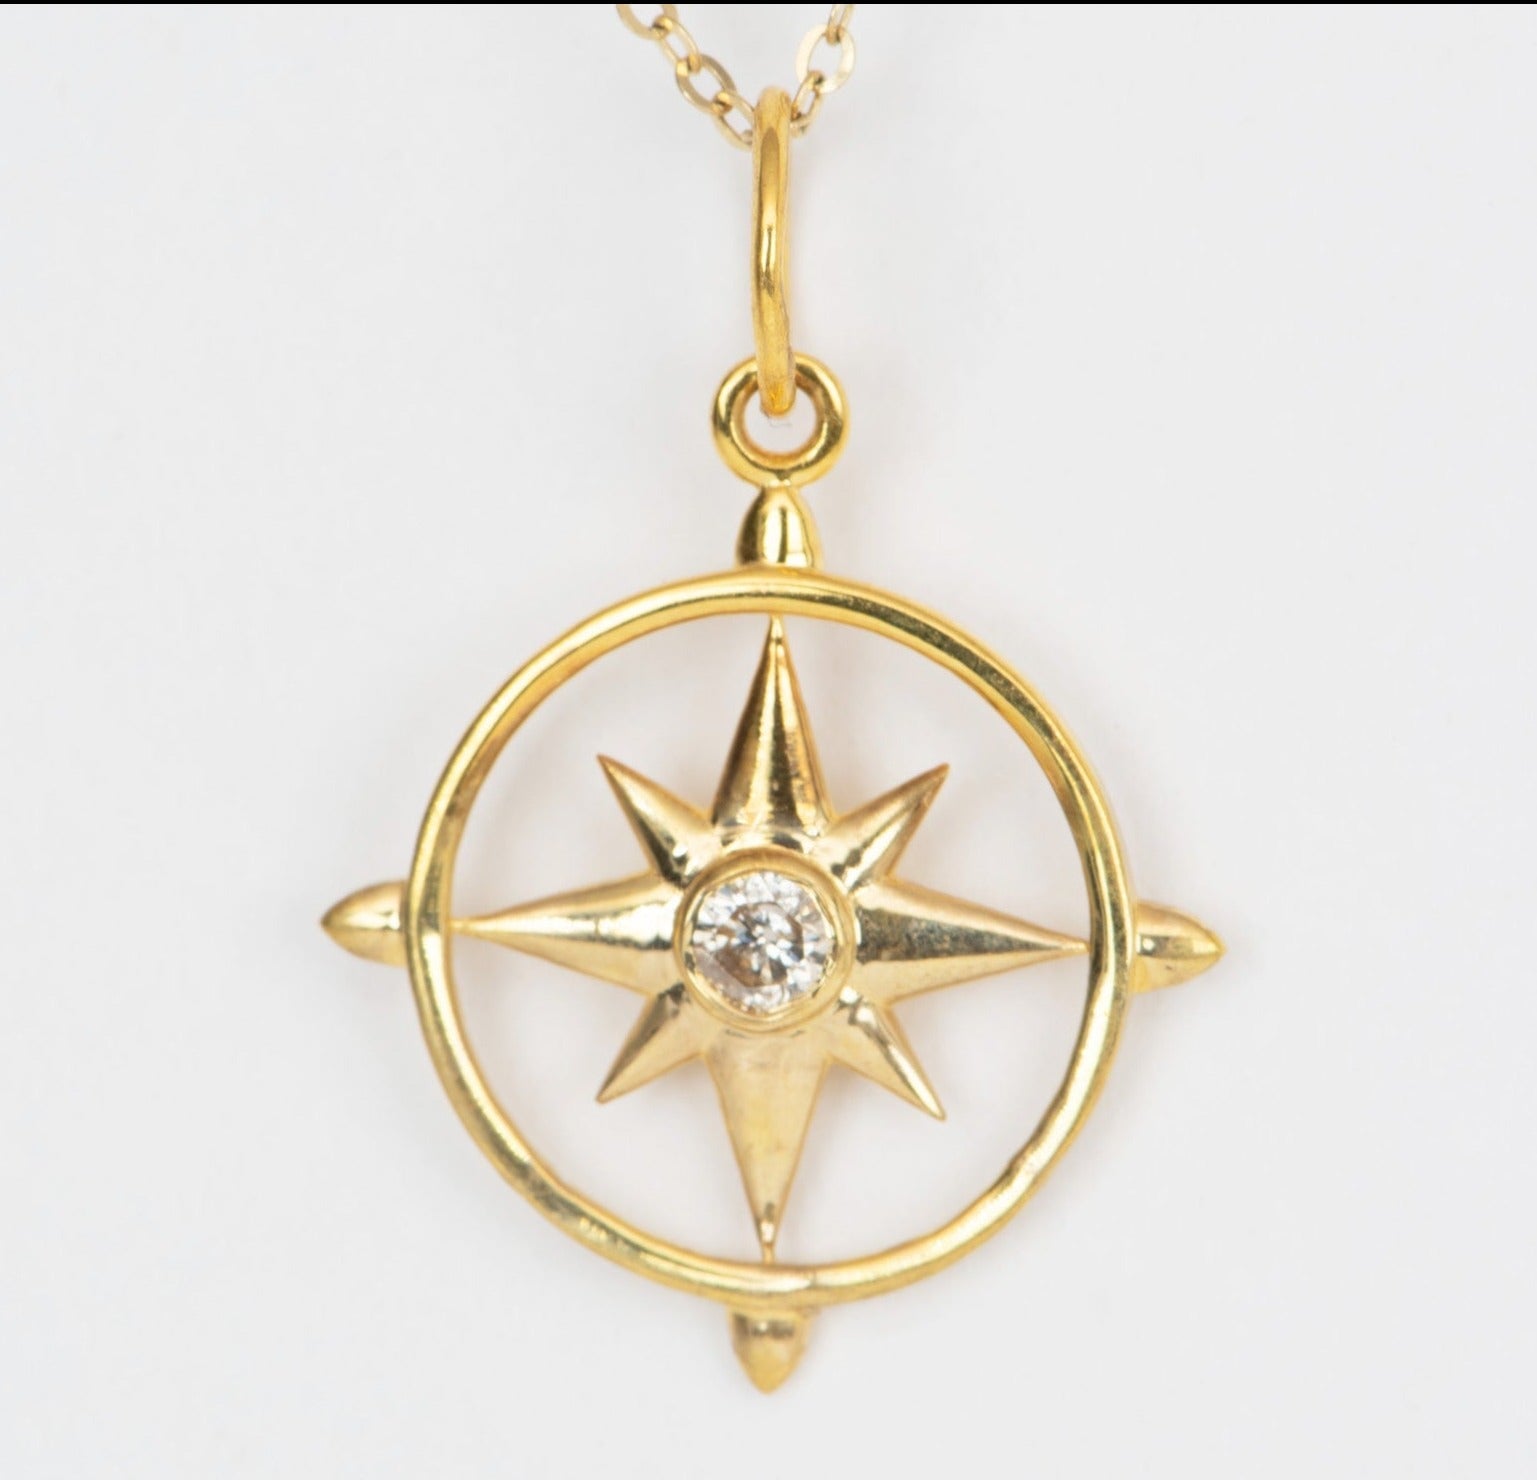 DLUXCA 40x35m 24K Gold Filled North Star Charms, Gold Star Pendant, Celestial Jewelry Minimalist Jewelry Making Supply Micro Pave Dual Star Charm D